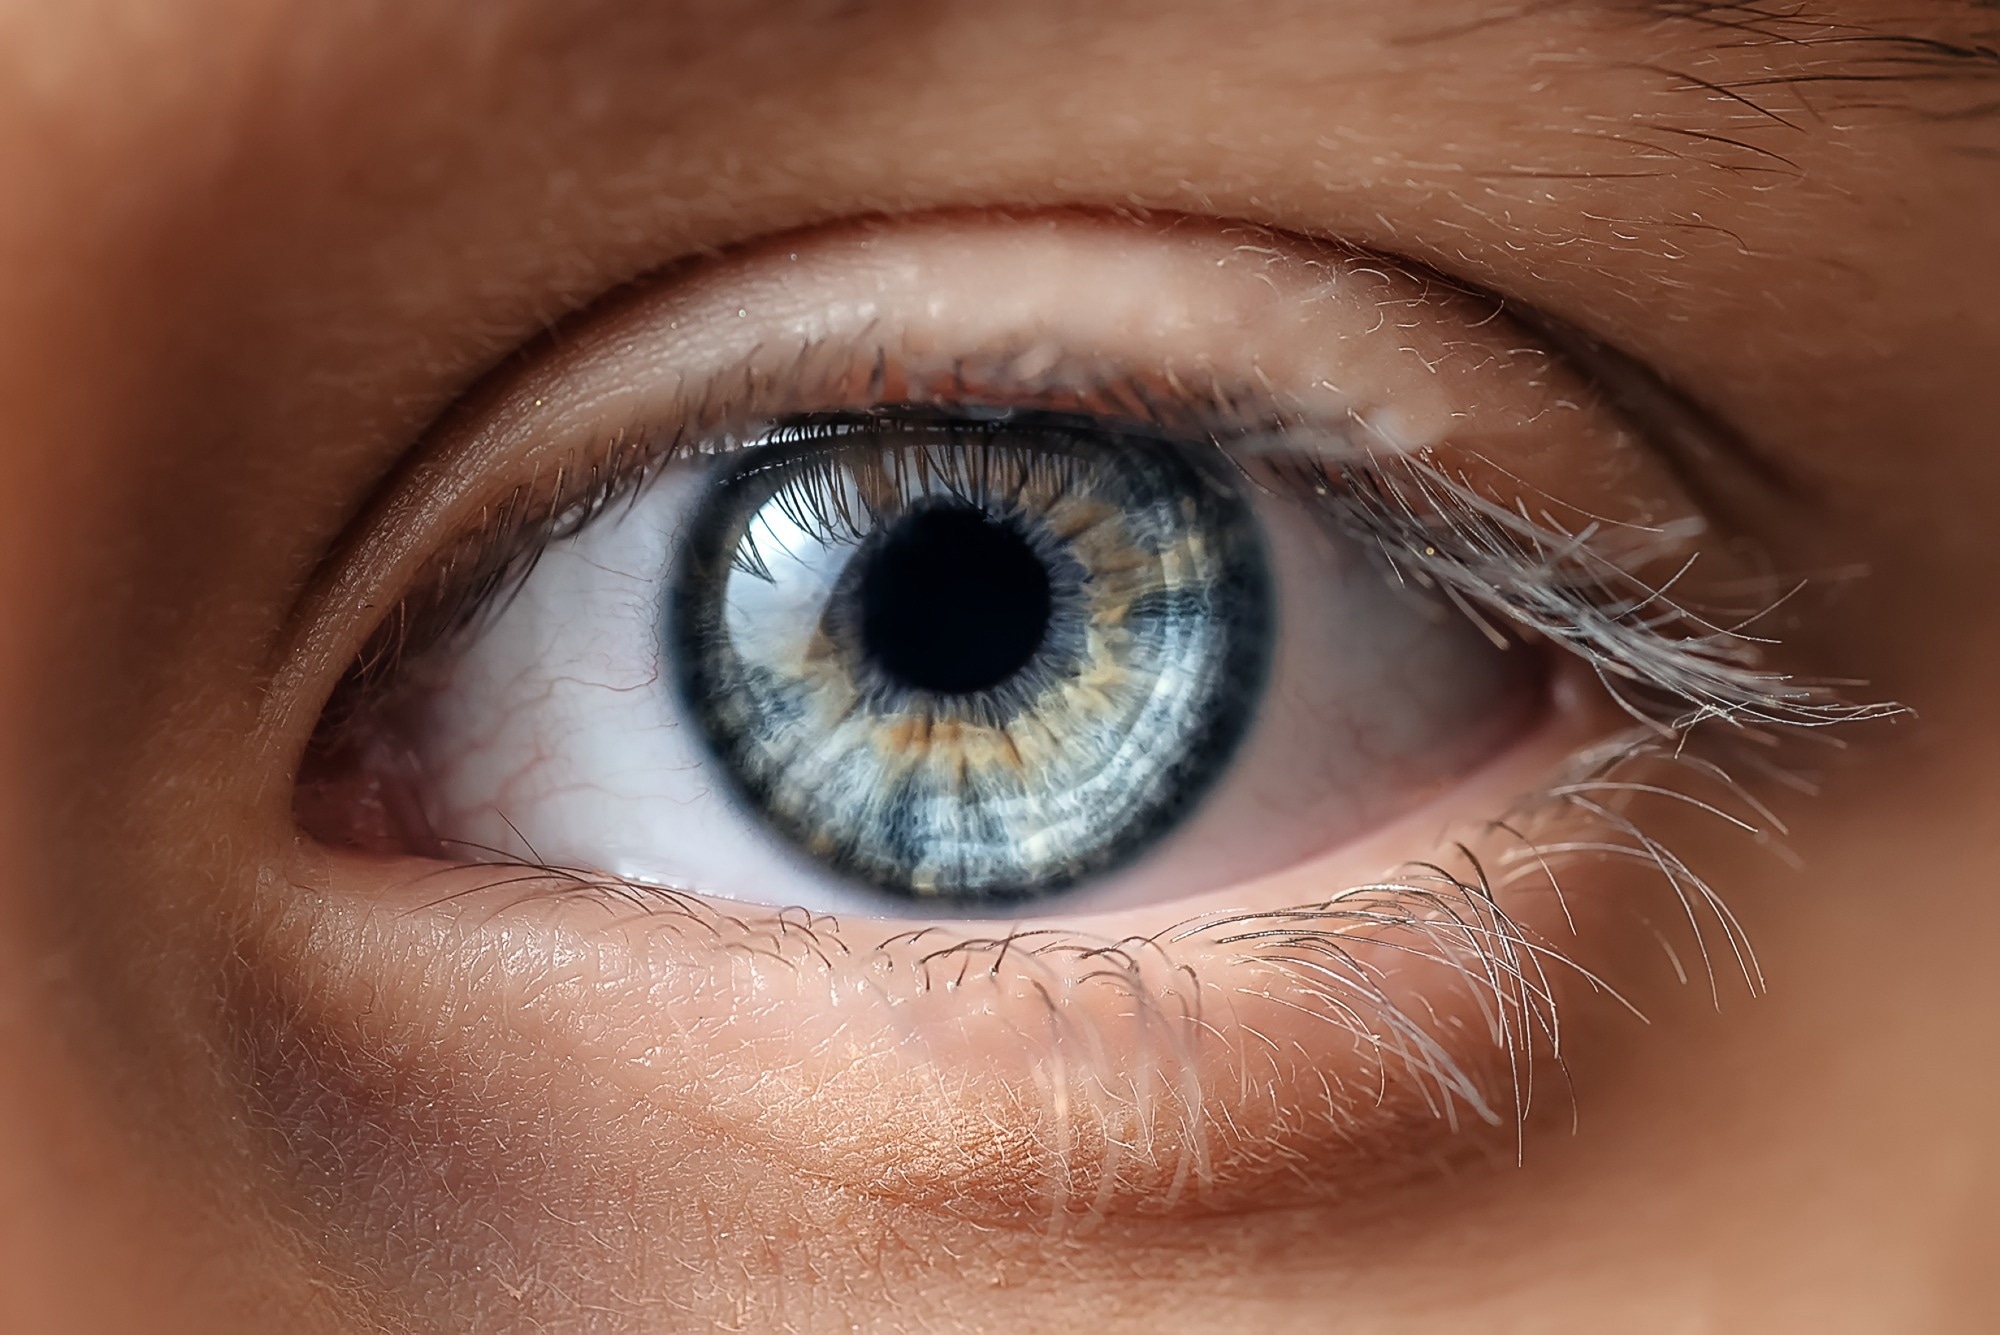 New Approach to Visualizing the Optical Performance of the Human Eye